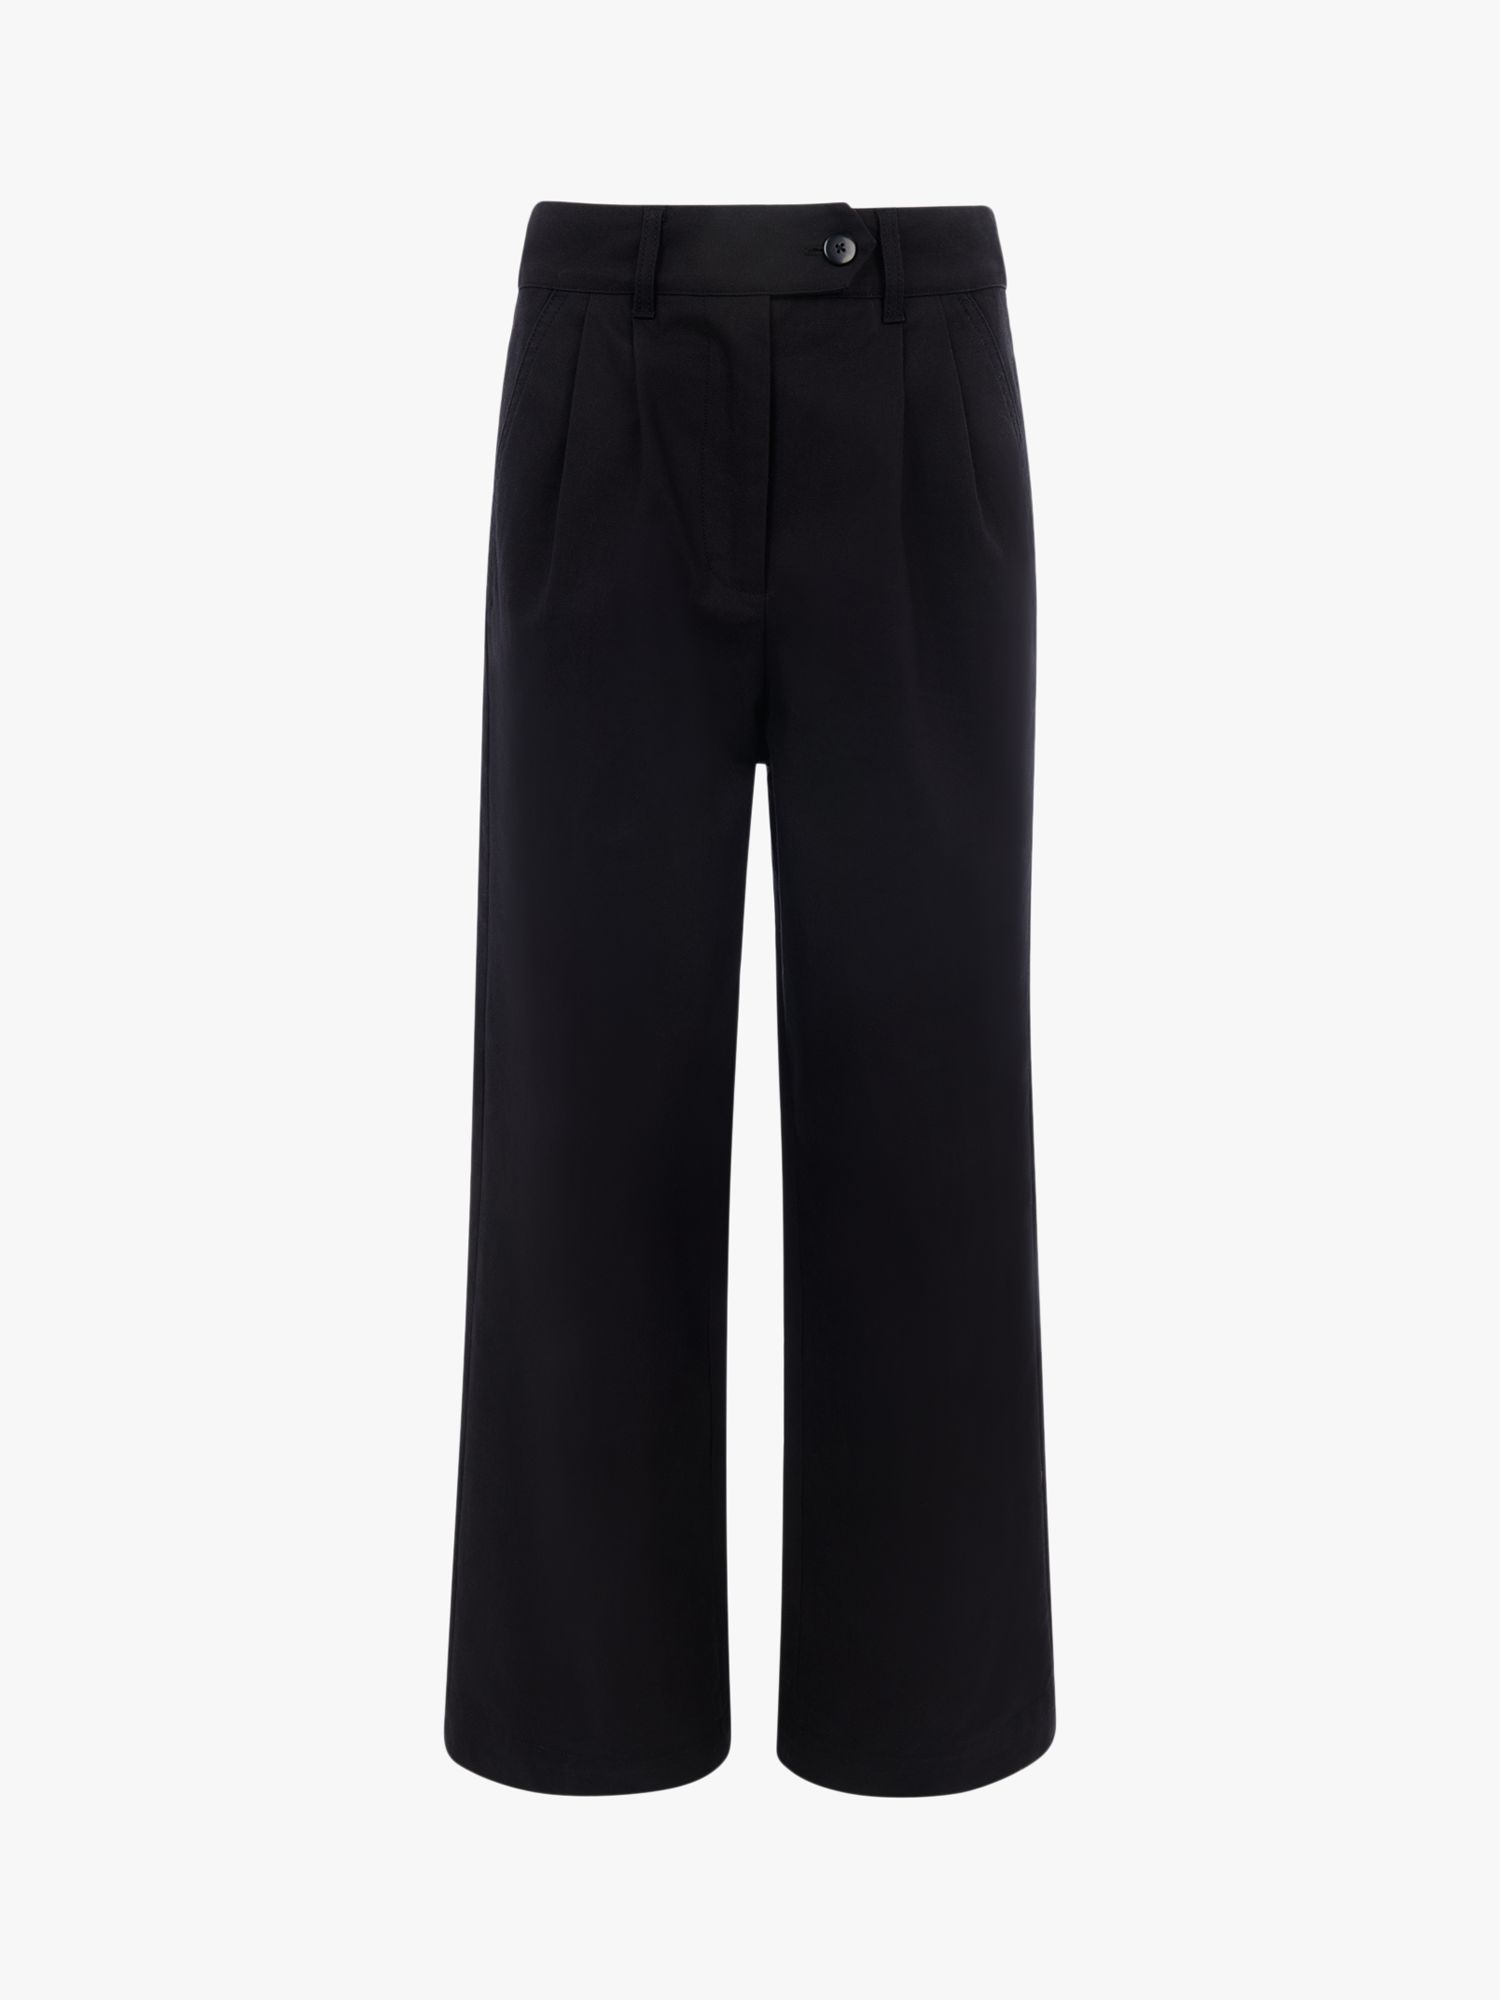 Whistles Robyn Wide Leg Trousers, Black at John Lewis & Partners